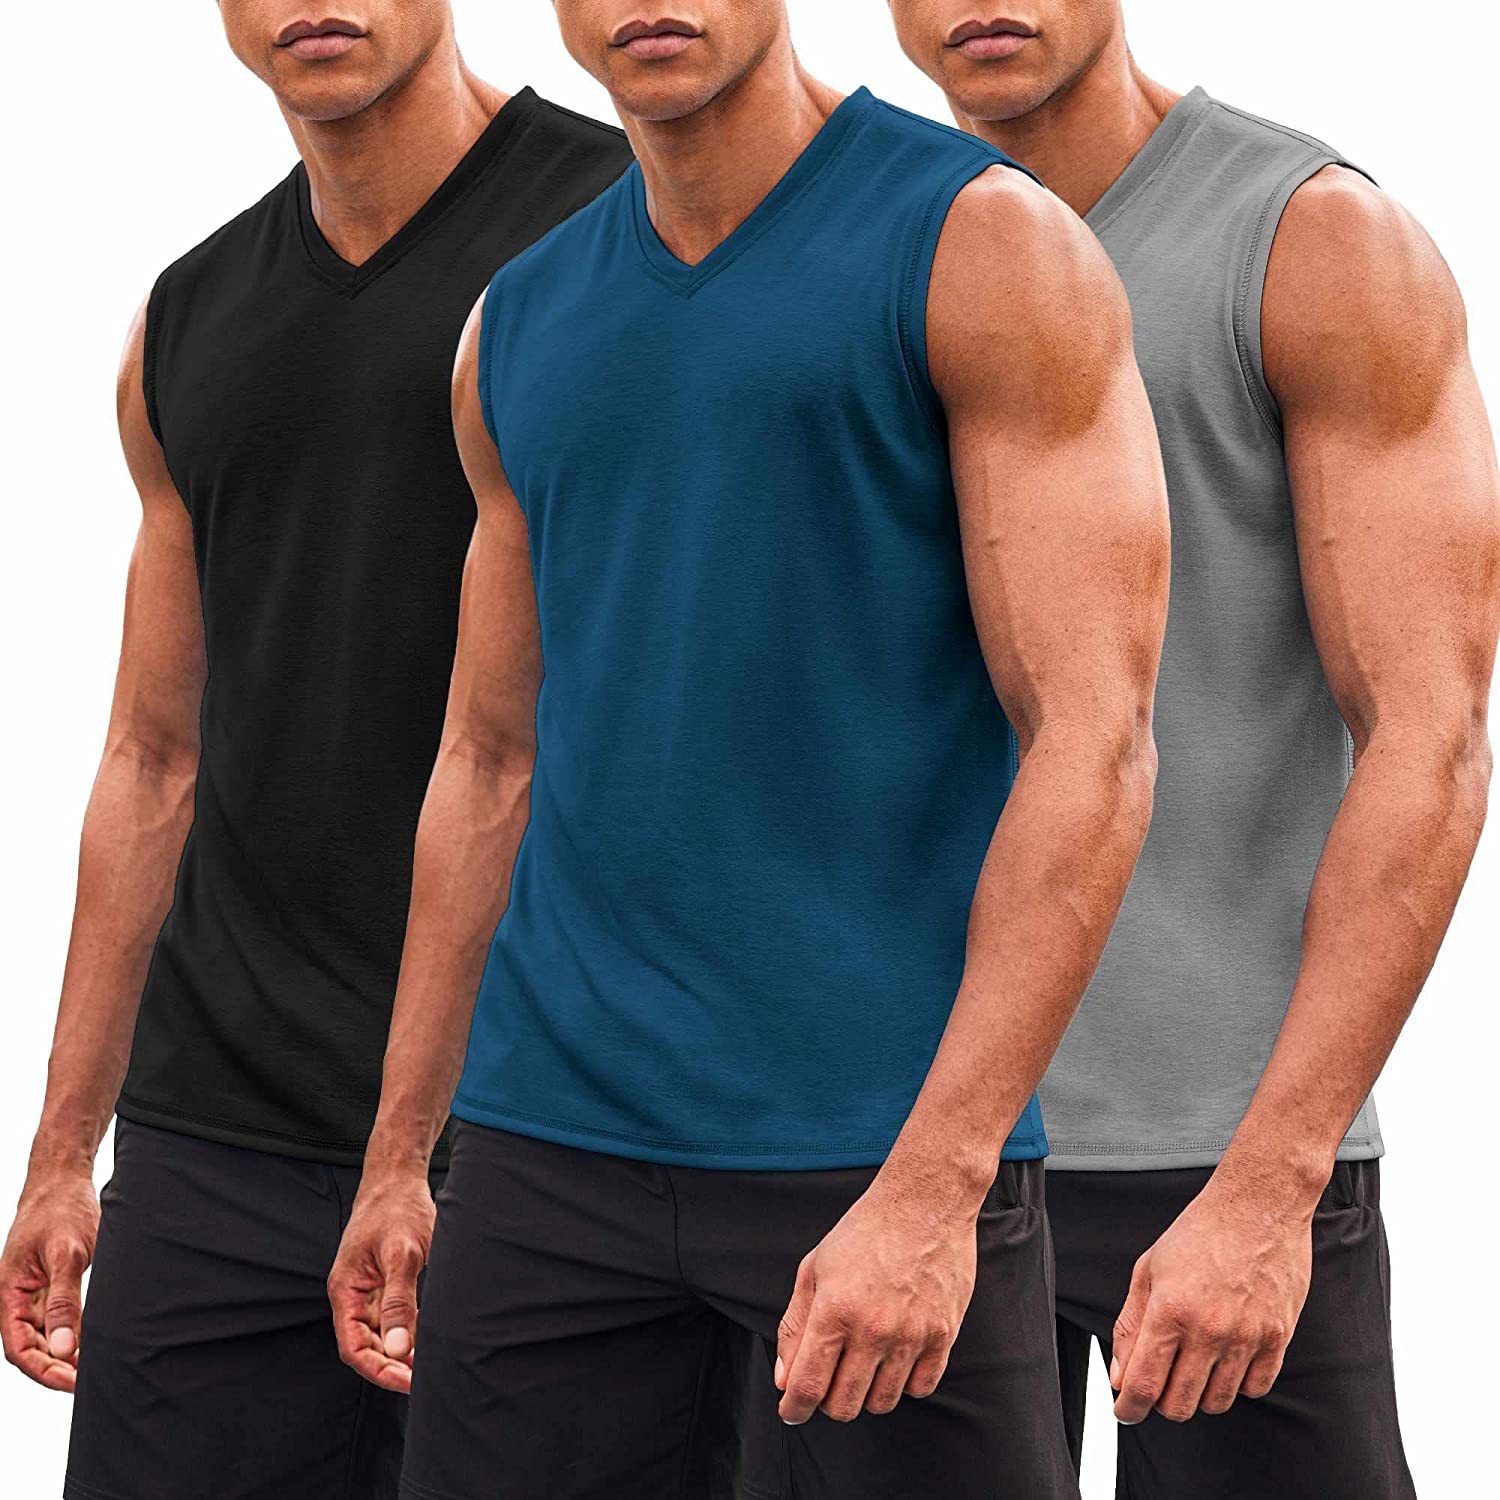 Buy COOFANDY Mens Workout Tank Tops 3 Pack Sleeveless Shirts Gym